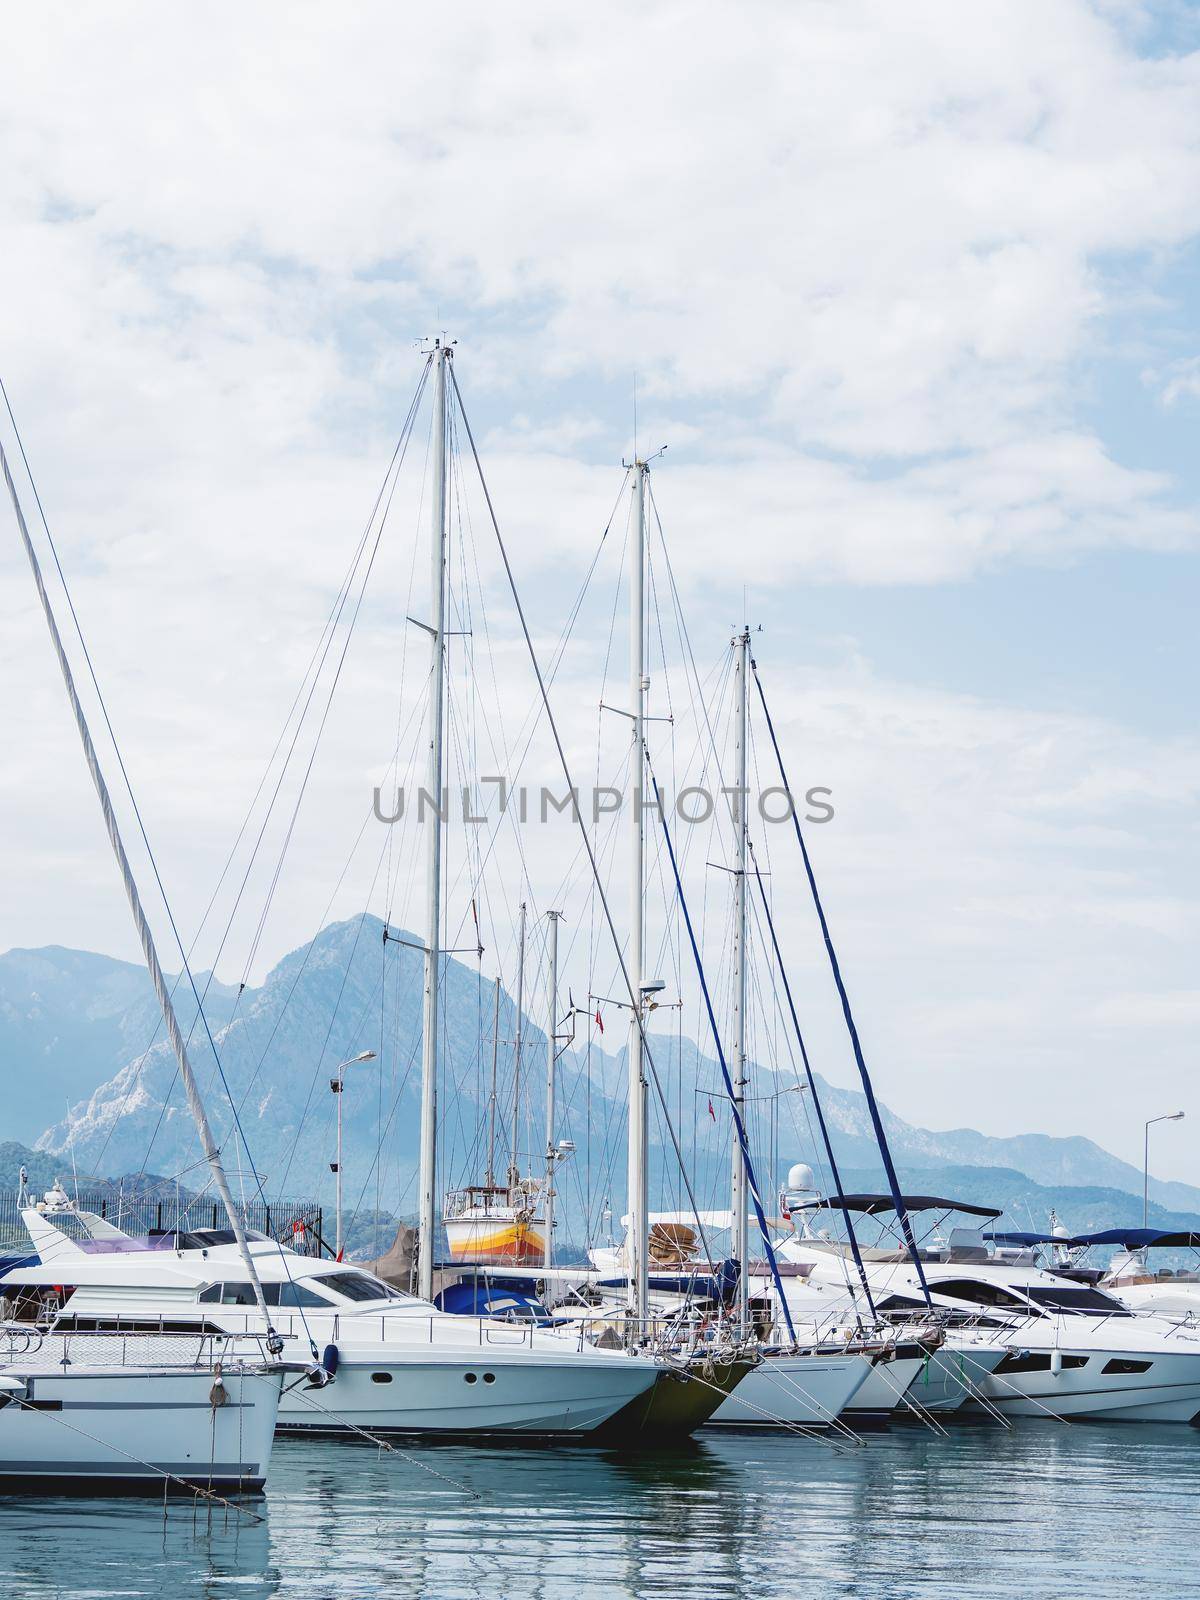 Yachts are moored at the Grand Marina, Kemer, Turkey. Beautiful ships for tourist trips on the Mediterranean sea. by aksenovko